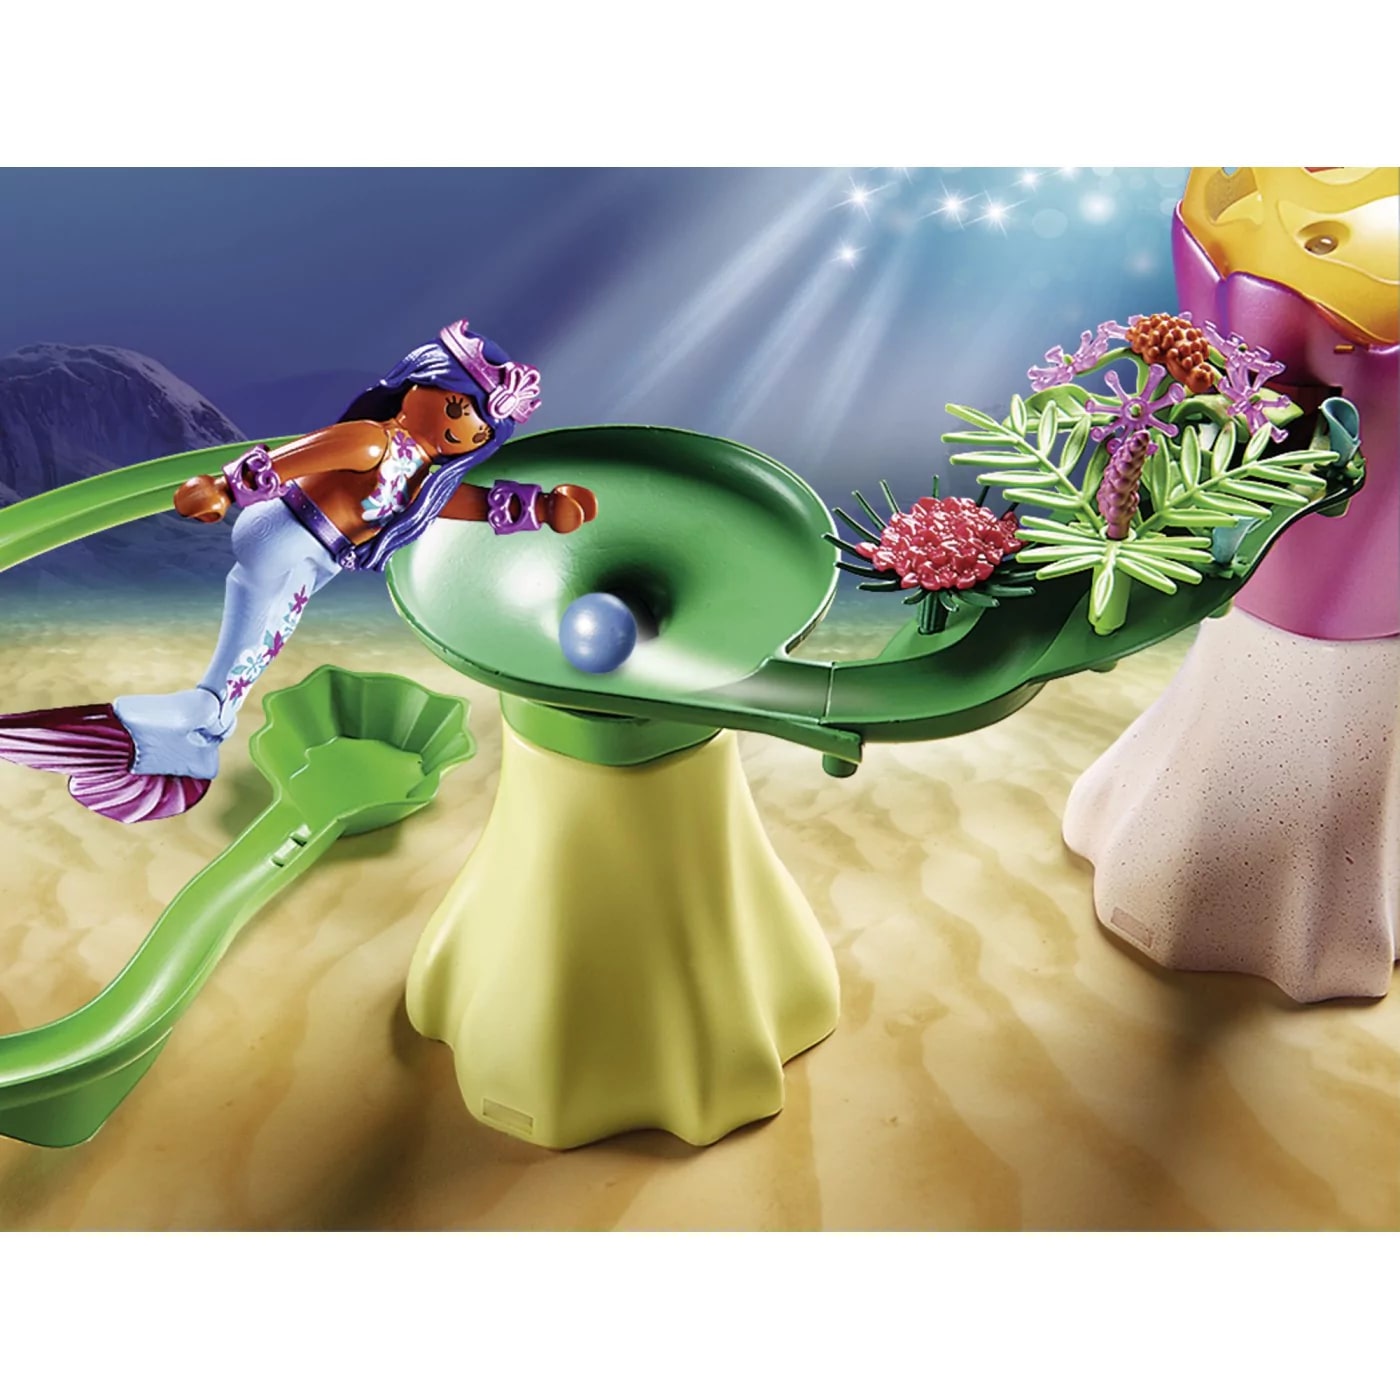 Playmobil Magical Mermaid Bay with Light Up Dome 127 Pieces